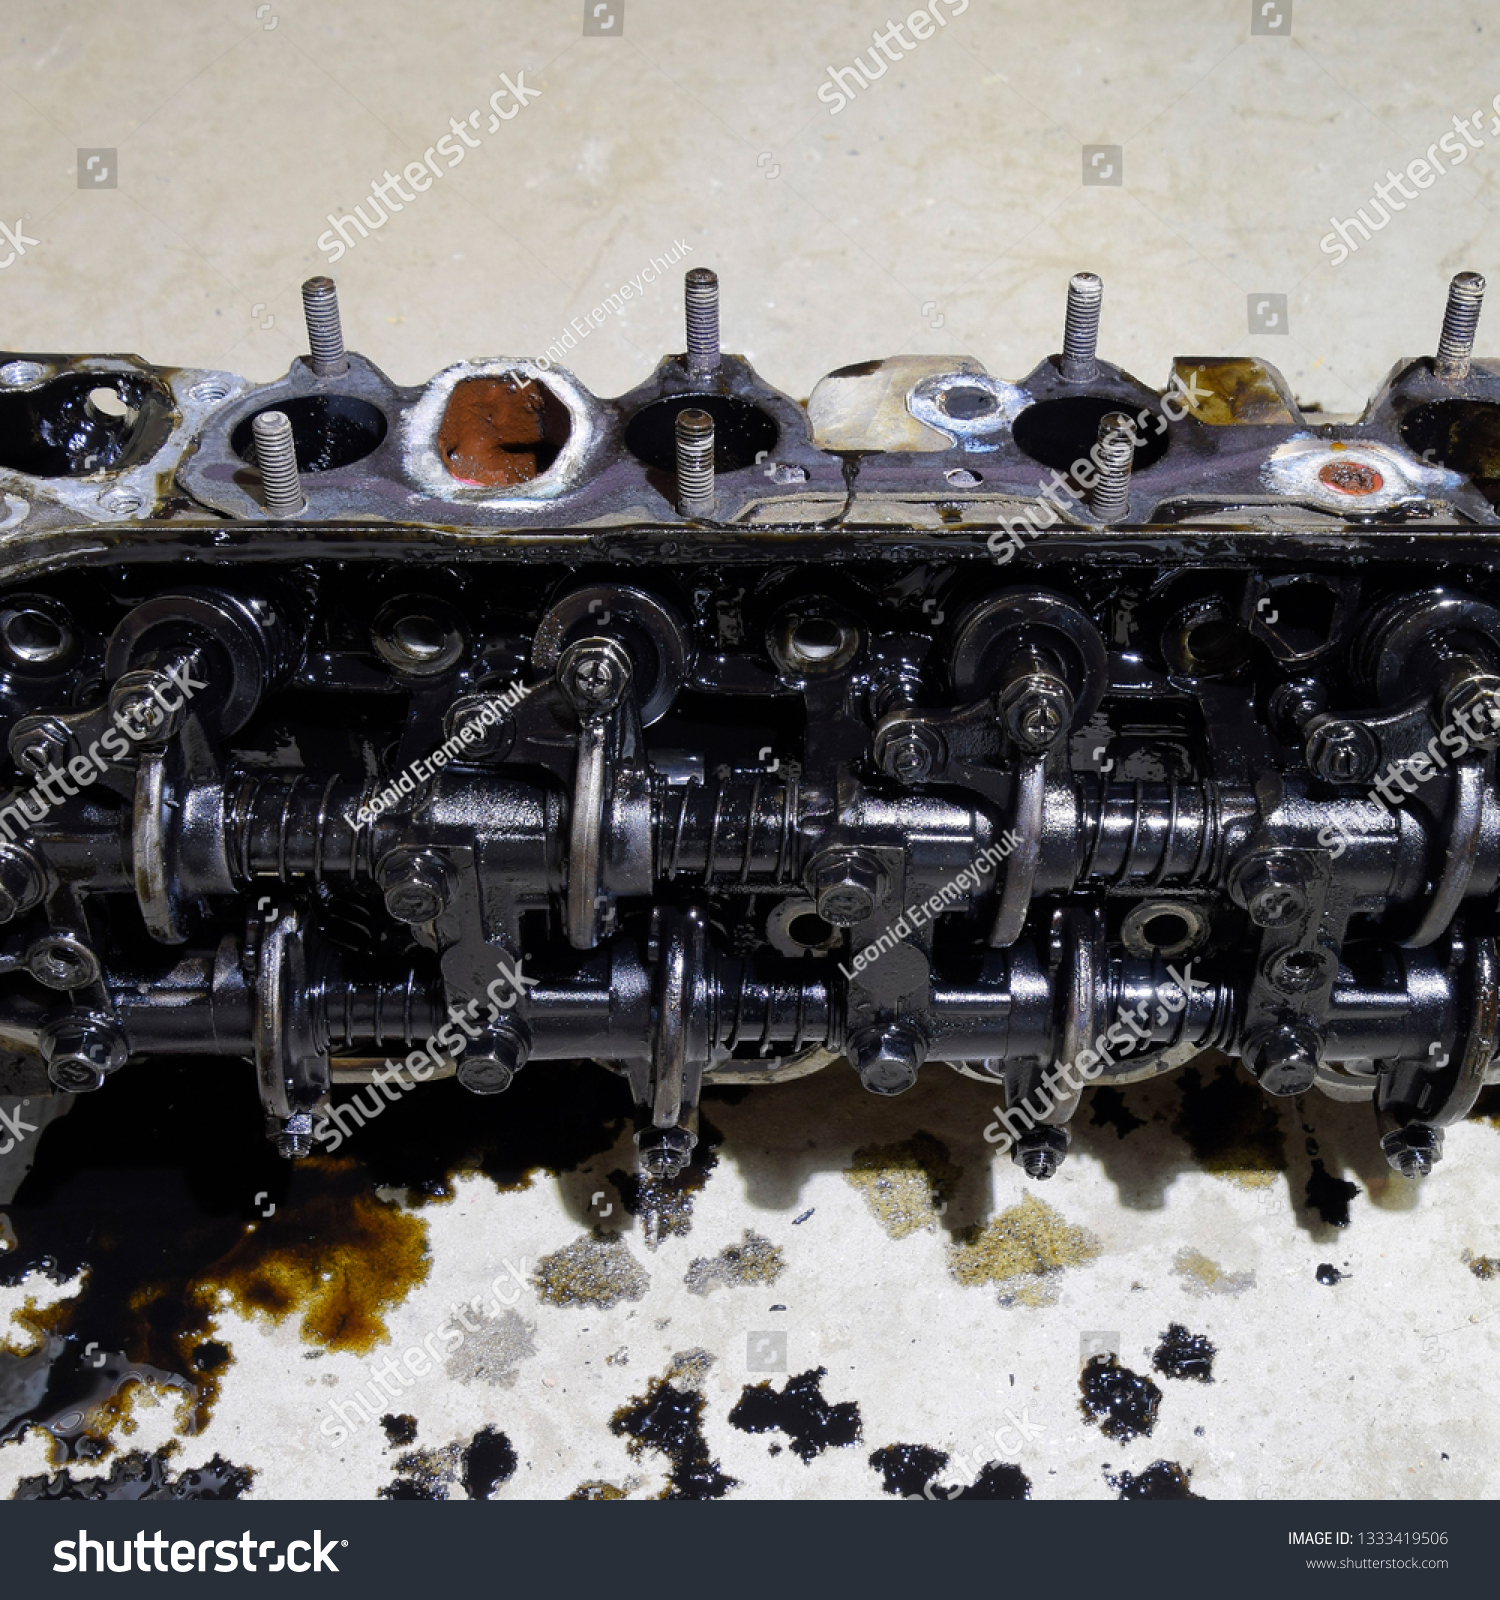 The head of the block of cylinders. The head of the block of cylinders removed from the engine for repair. Parts in engine oil. Car engine repair in the service. #1333419506